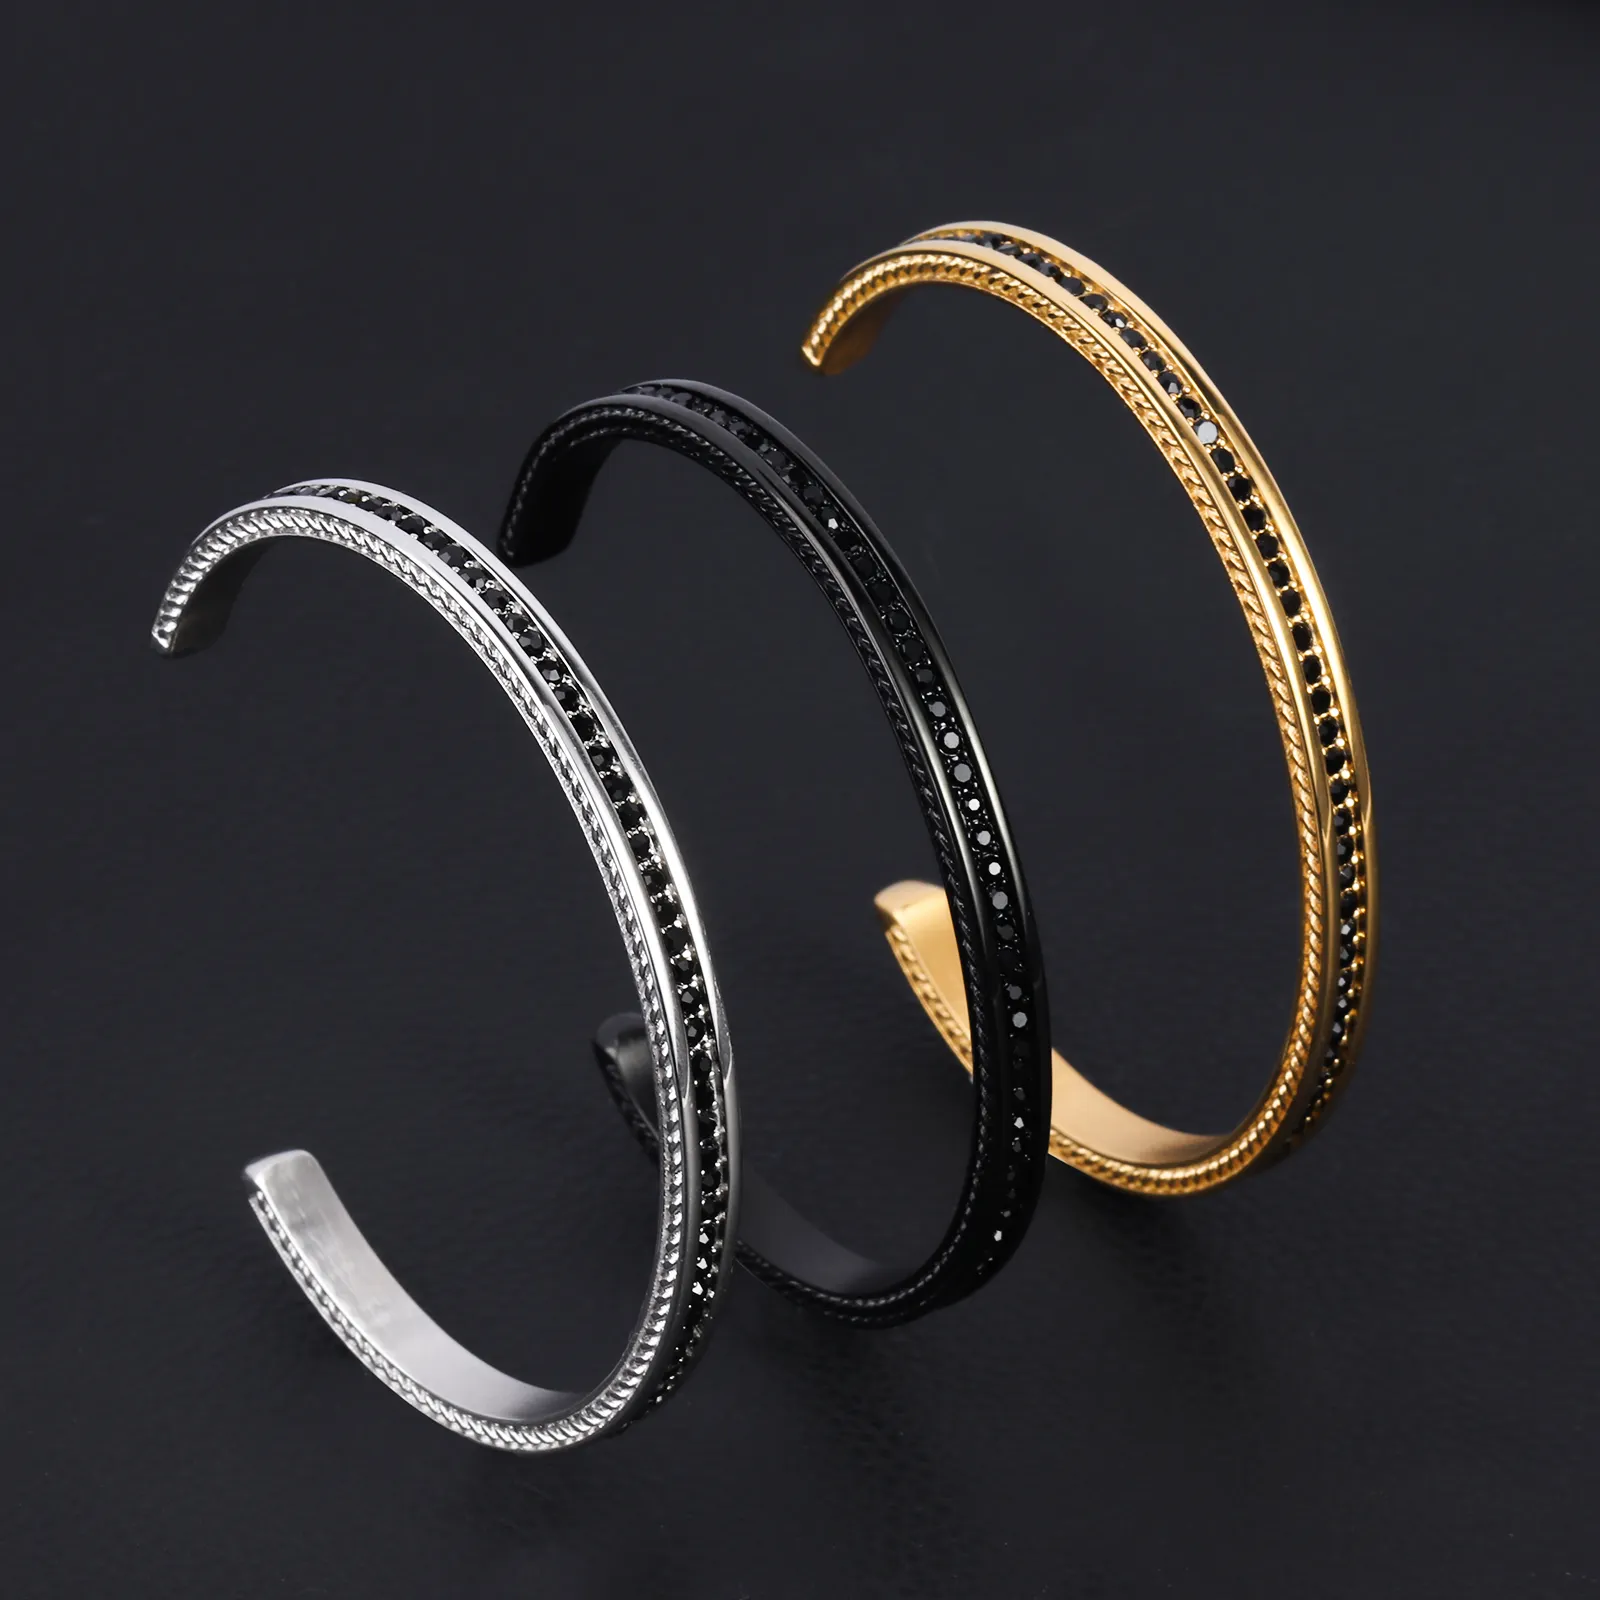 Custom Luxury Fashion Fine Jewelry Rhinestone Open 18K Gold Plated Stainless Steel Textured Bangle Cuff Bracelets For Mens